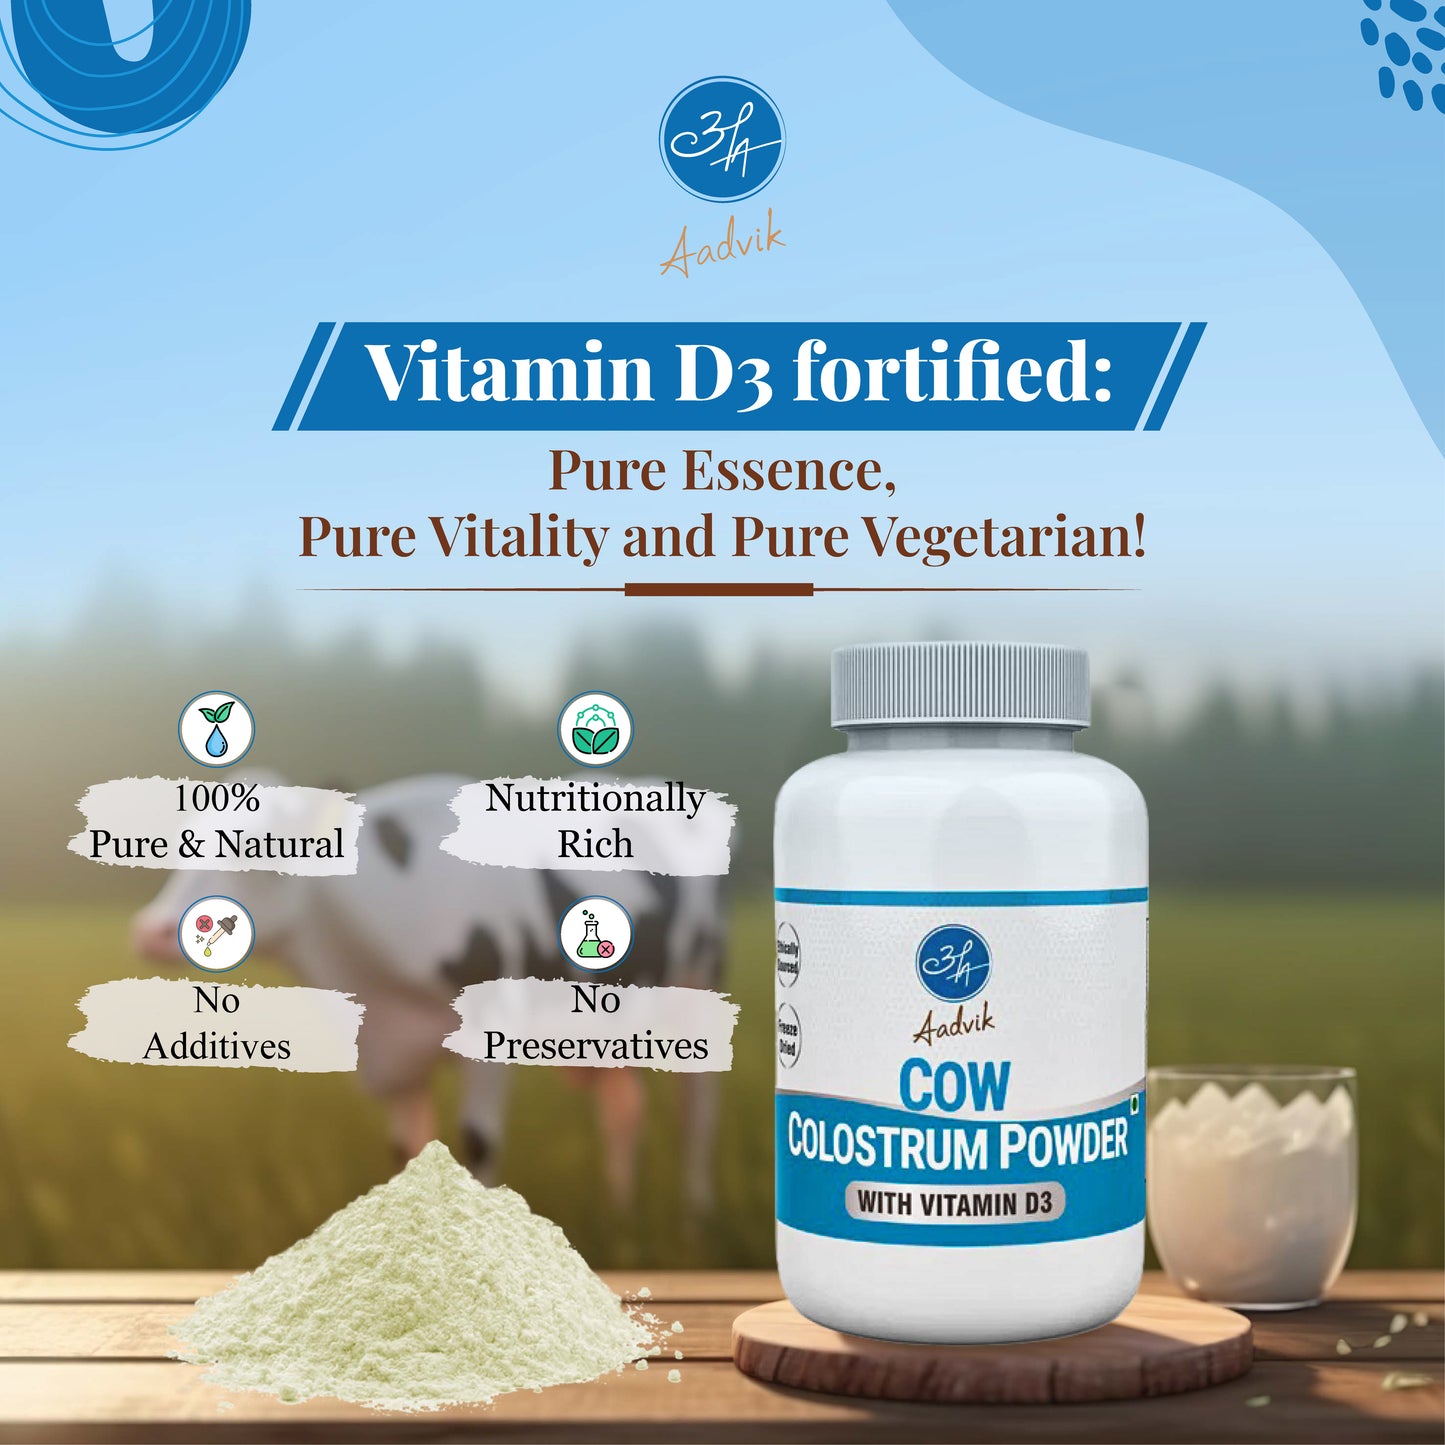 Cow Colostrum Powder now with Vitamin D3 (600 IU per serving) | 100g